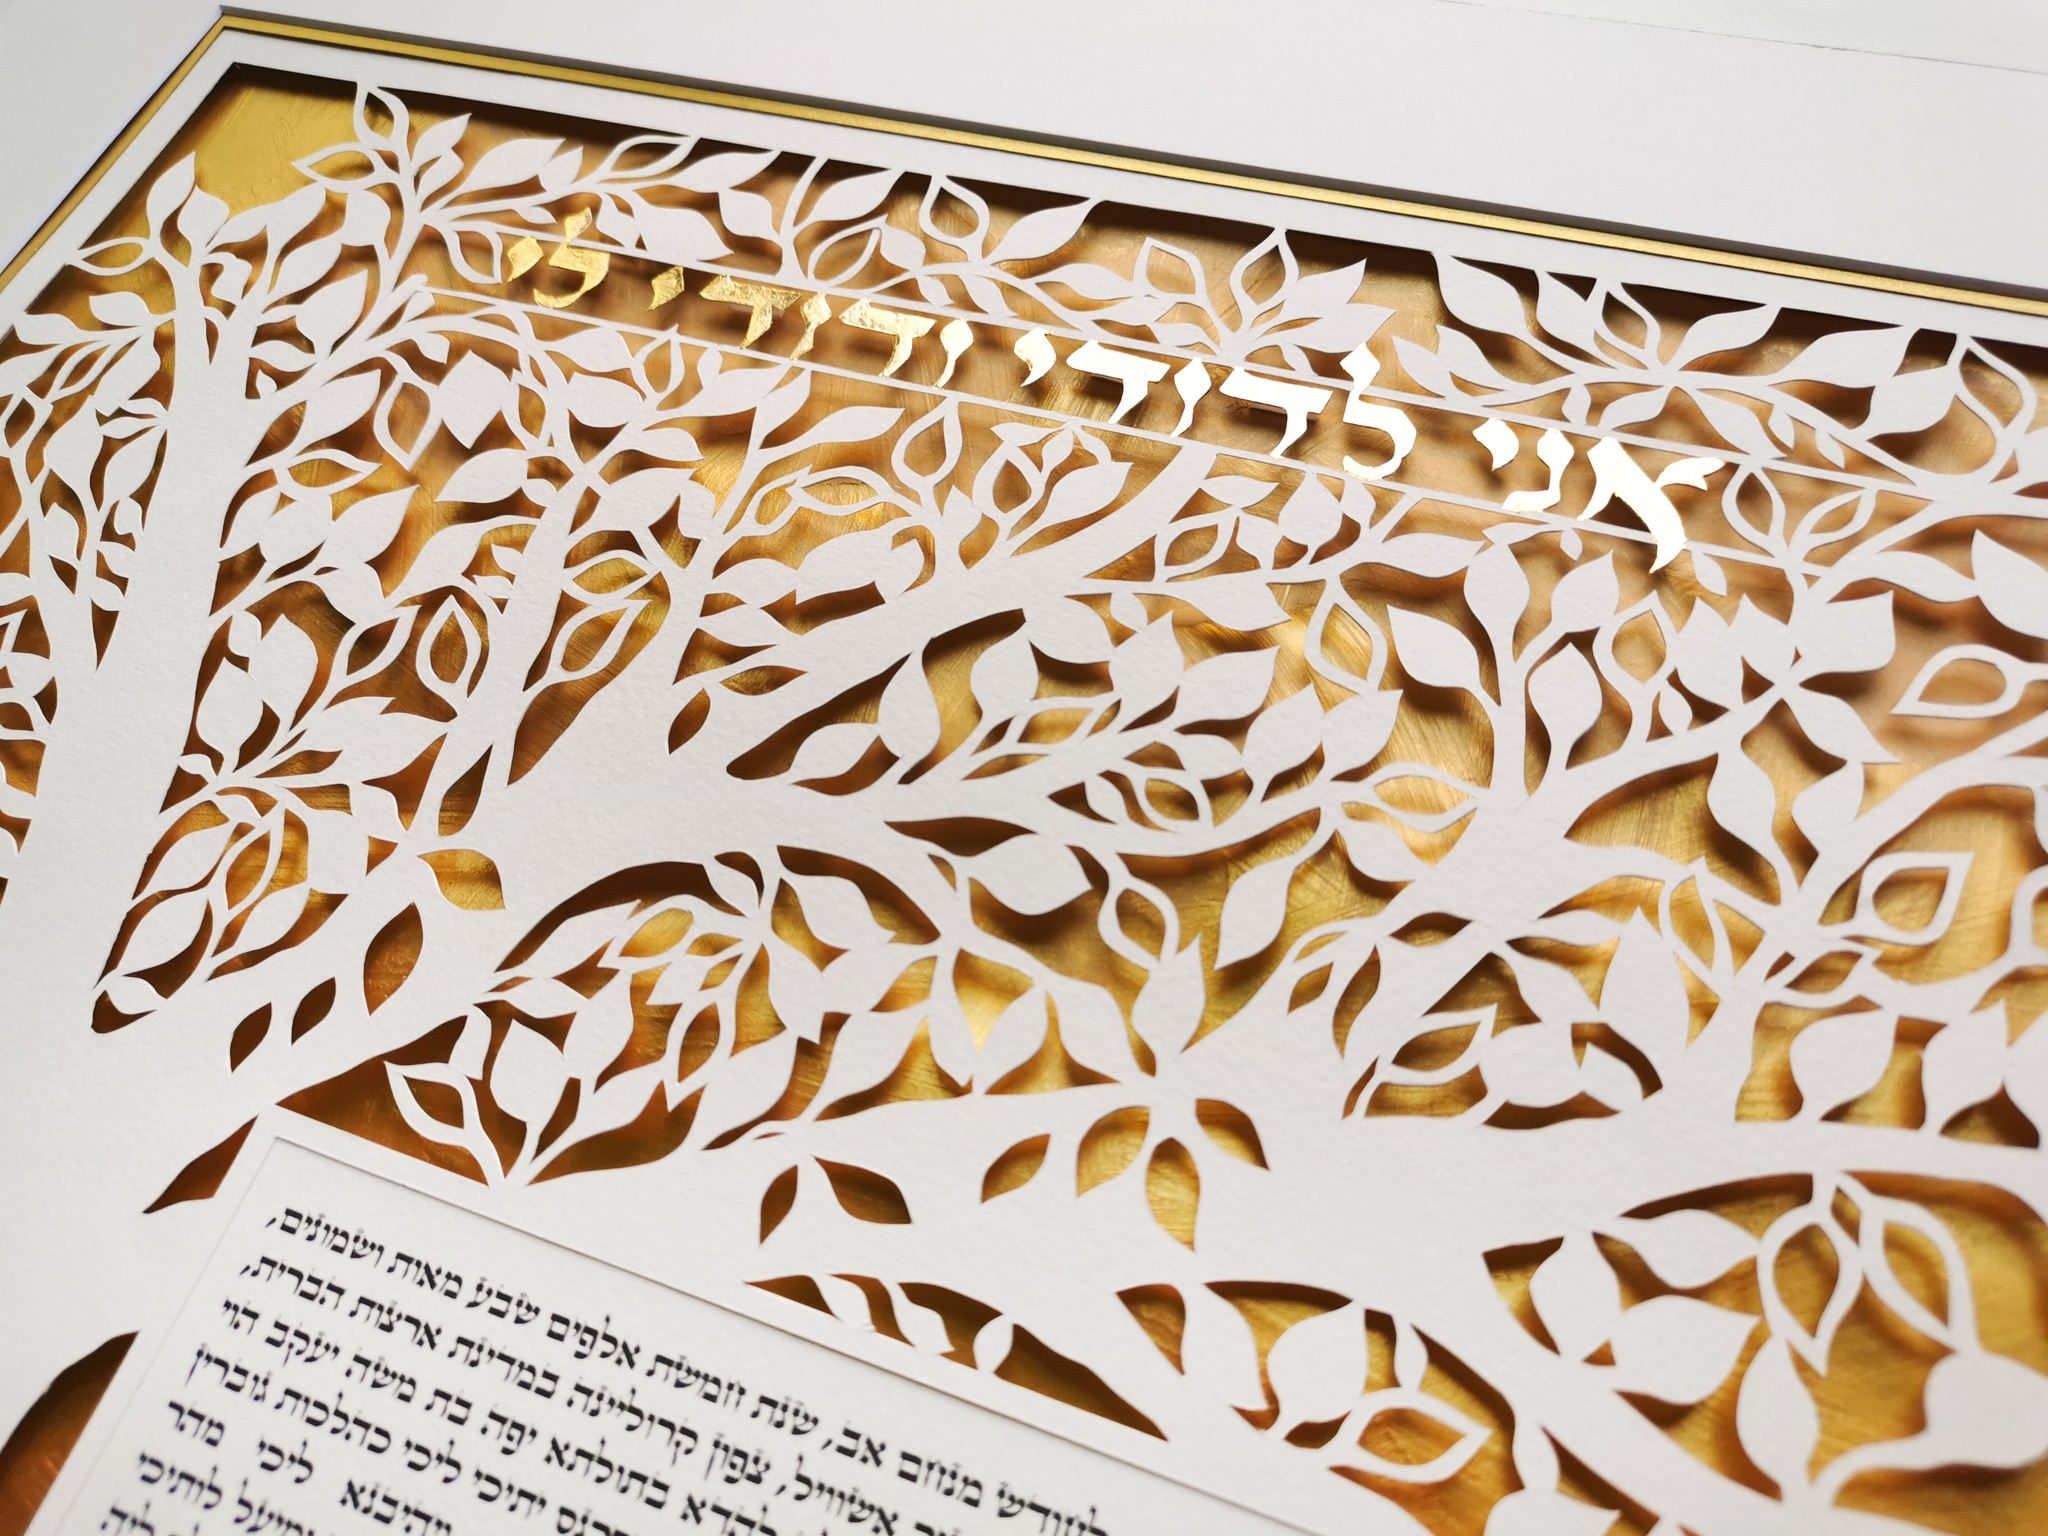 1. A close-up of a beautifully intricate personalized papercut gift, showing the level of detail involved.